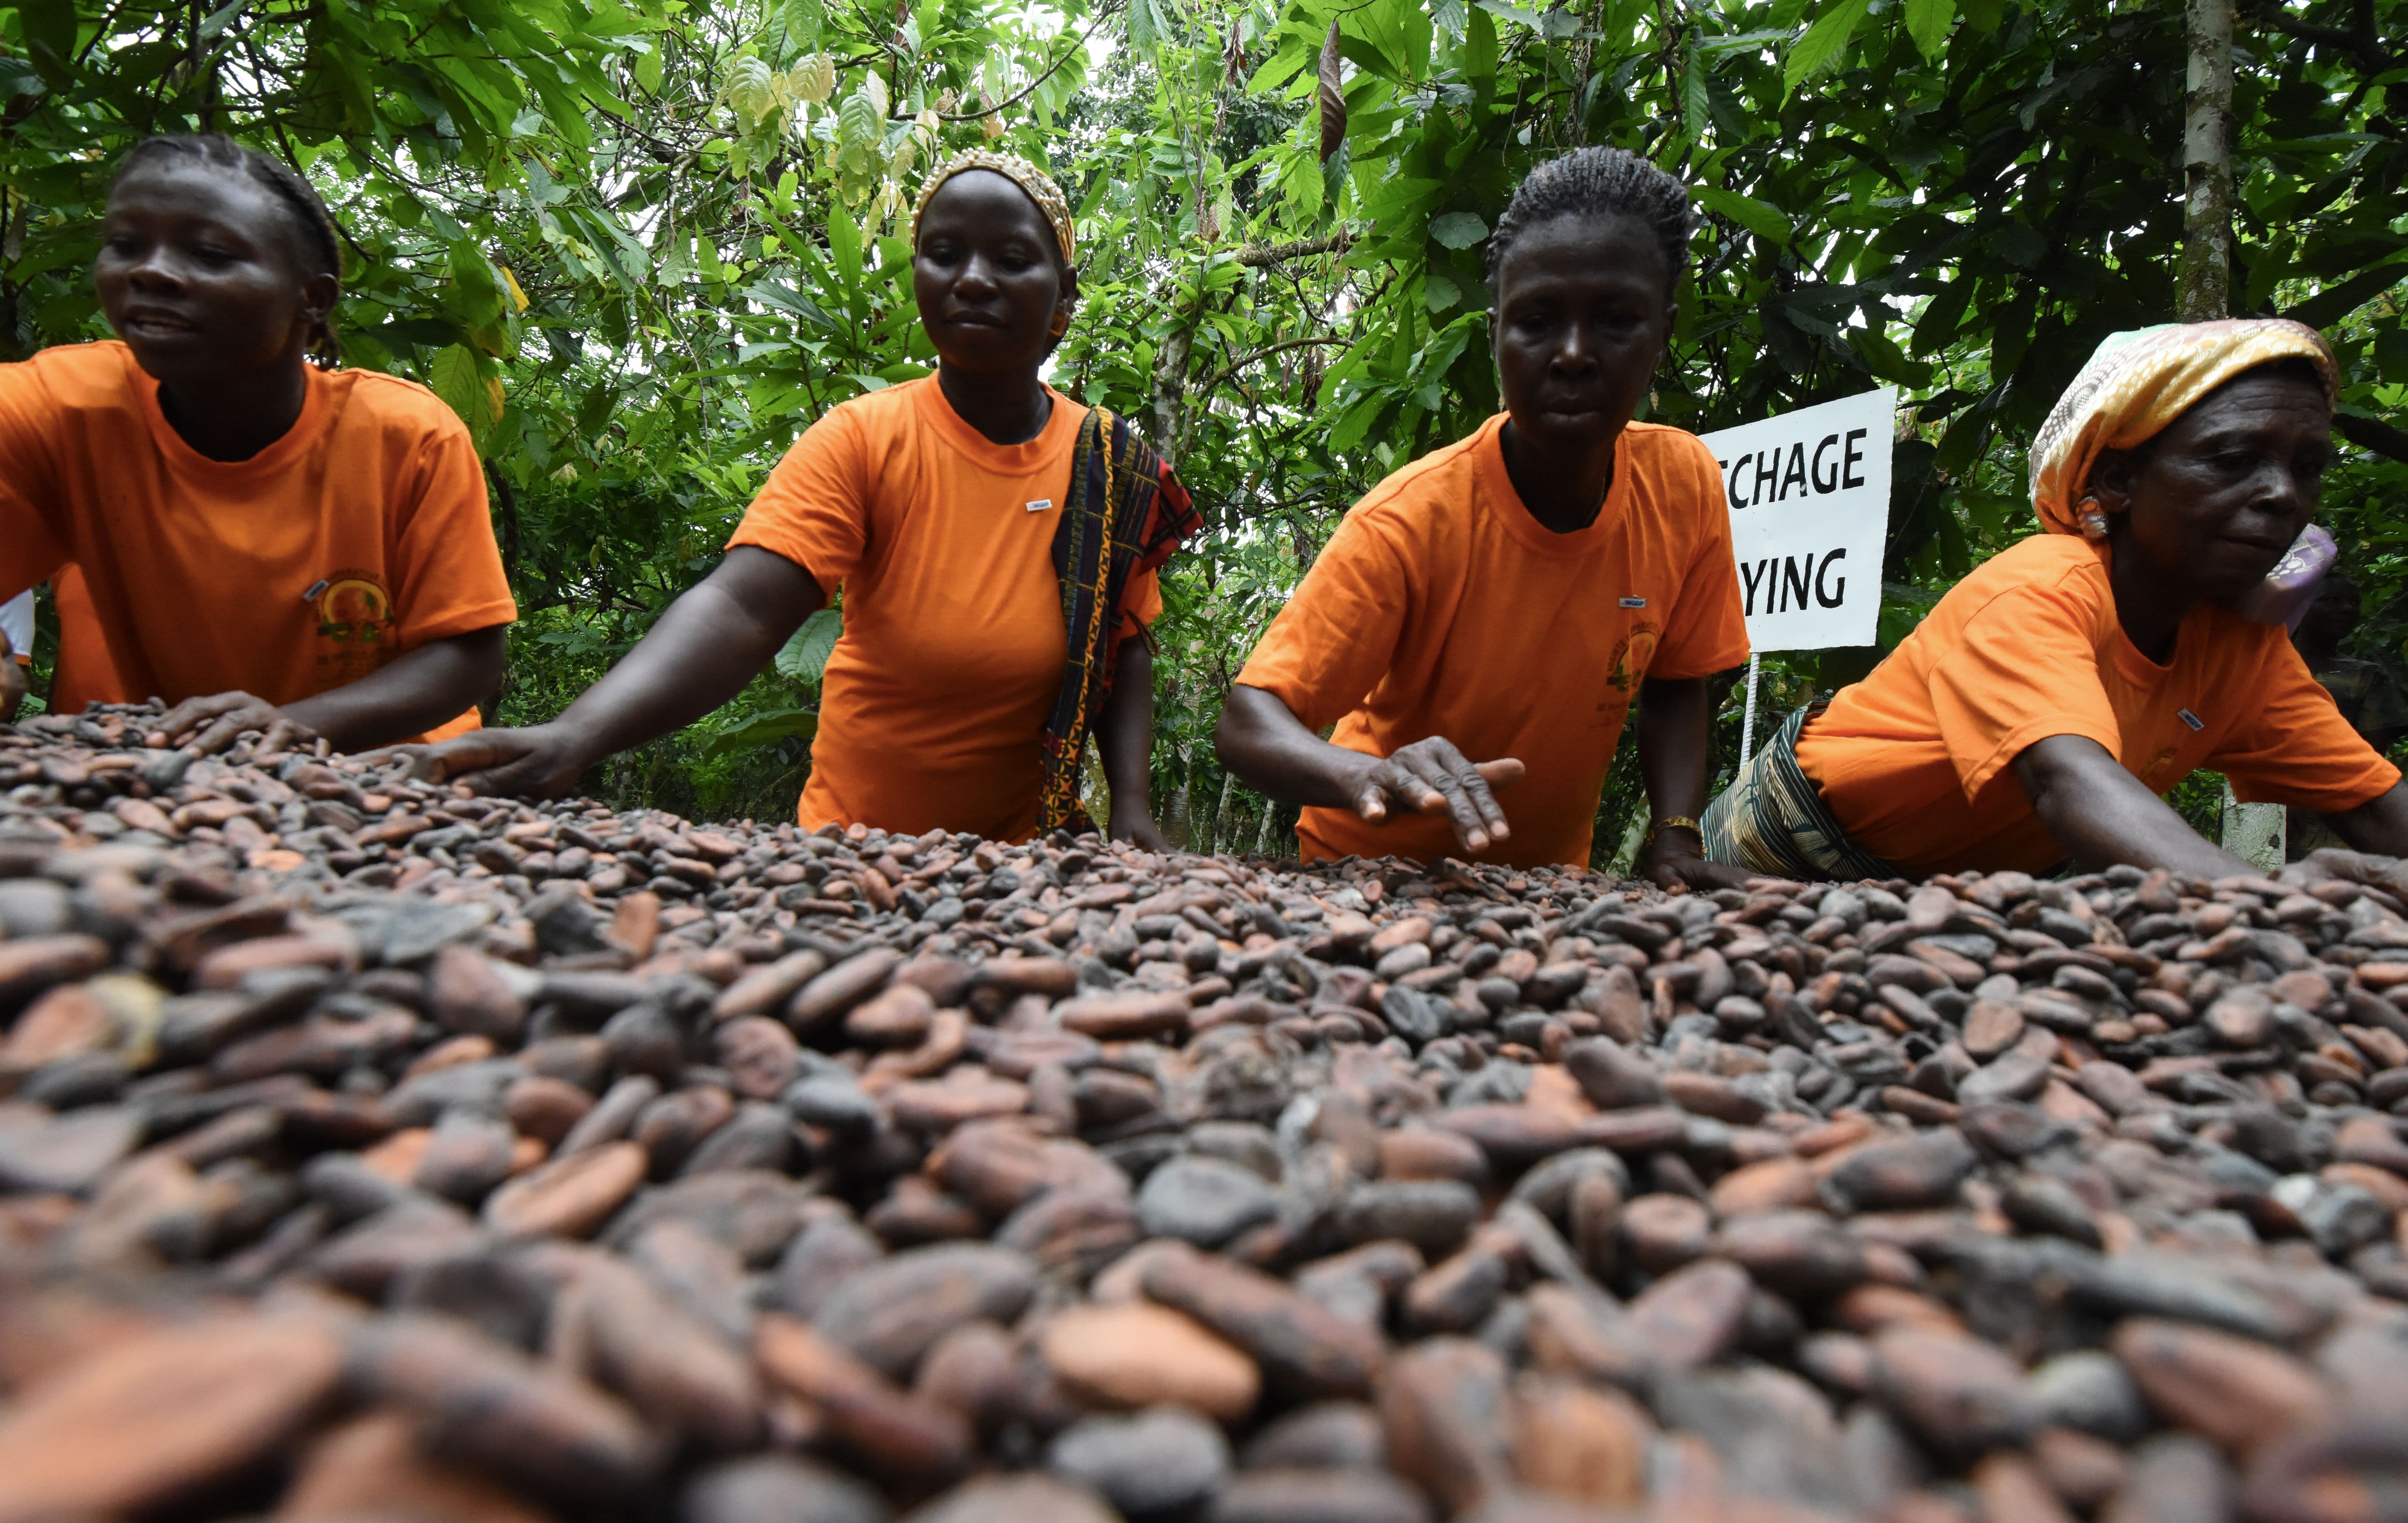 Cocoa Production In Africa